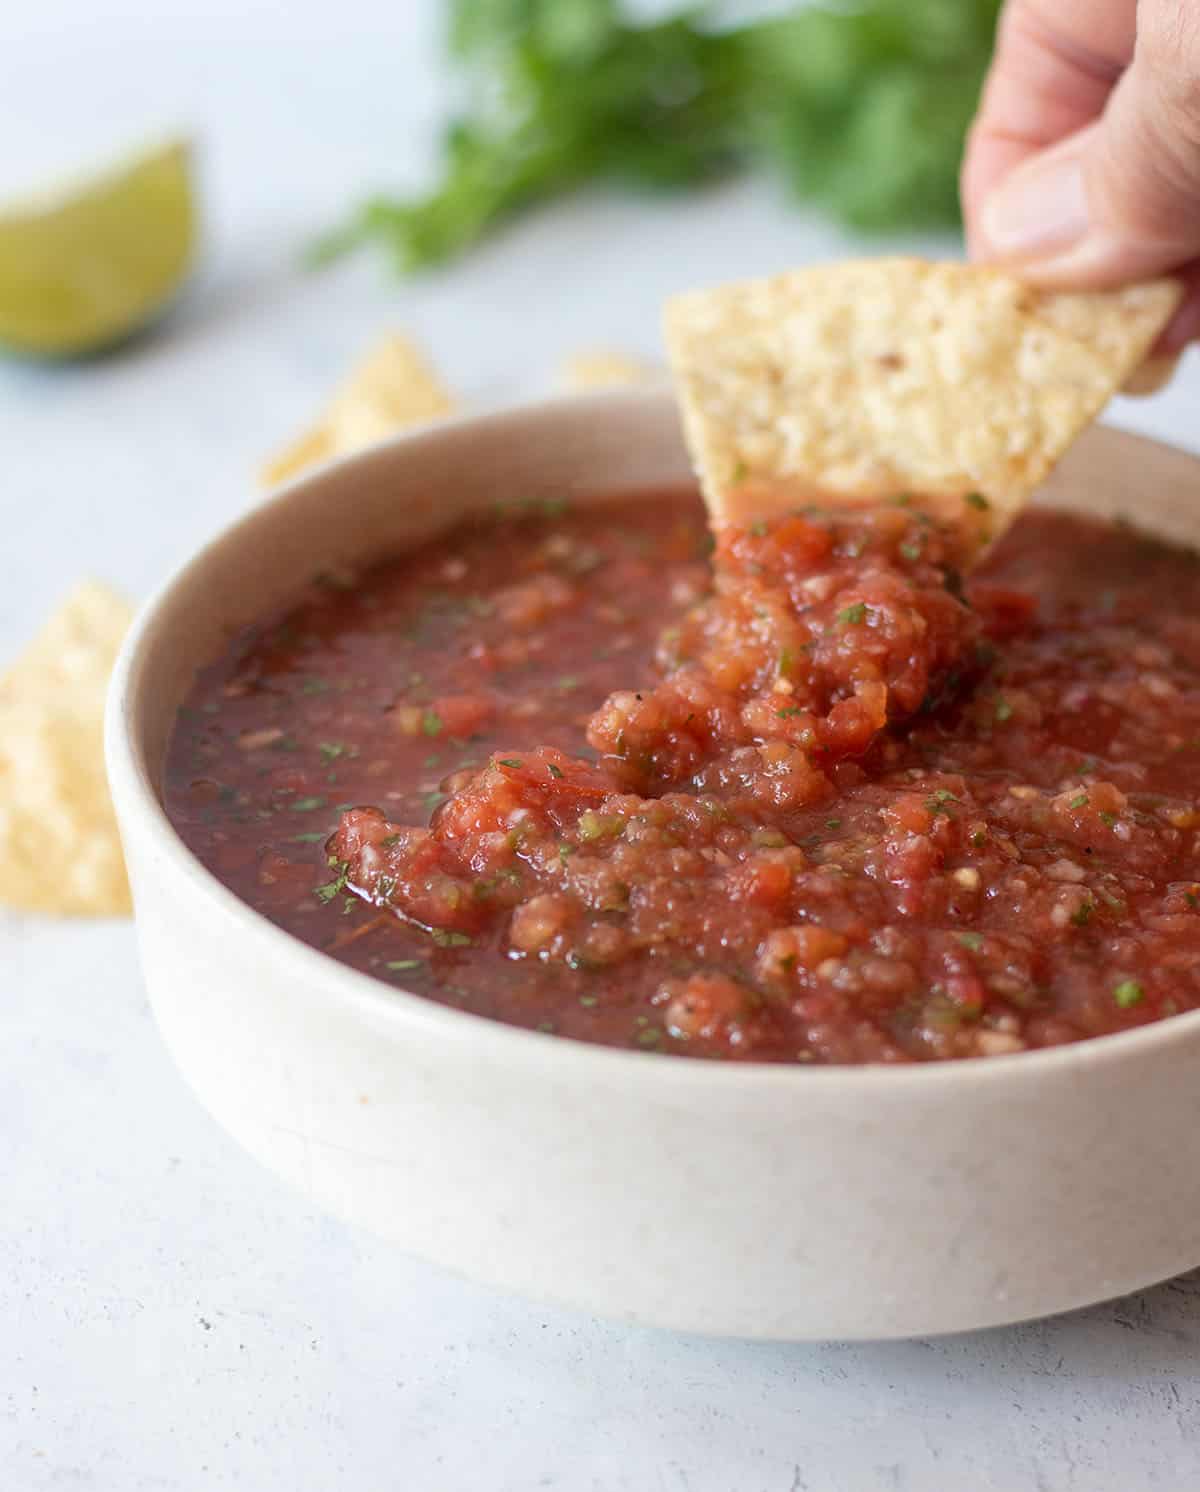 Homemade salsa in a white bowl with a tortilla chip dipping some salsa on it.